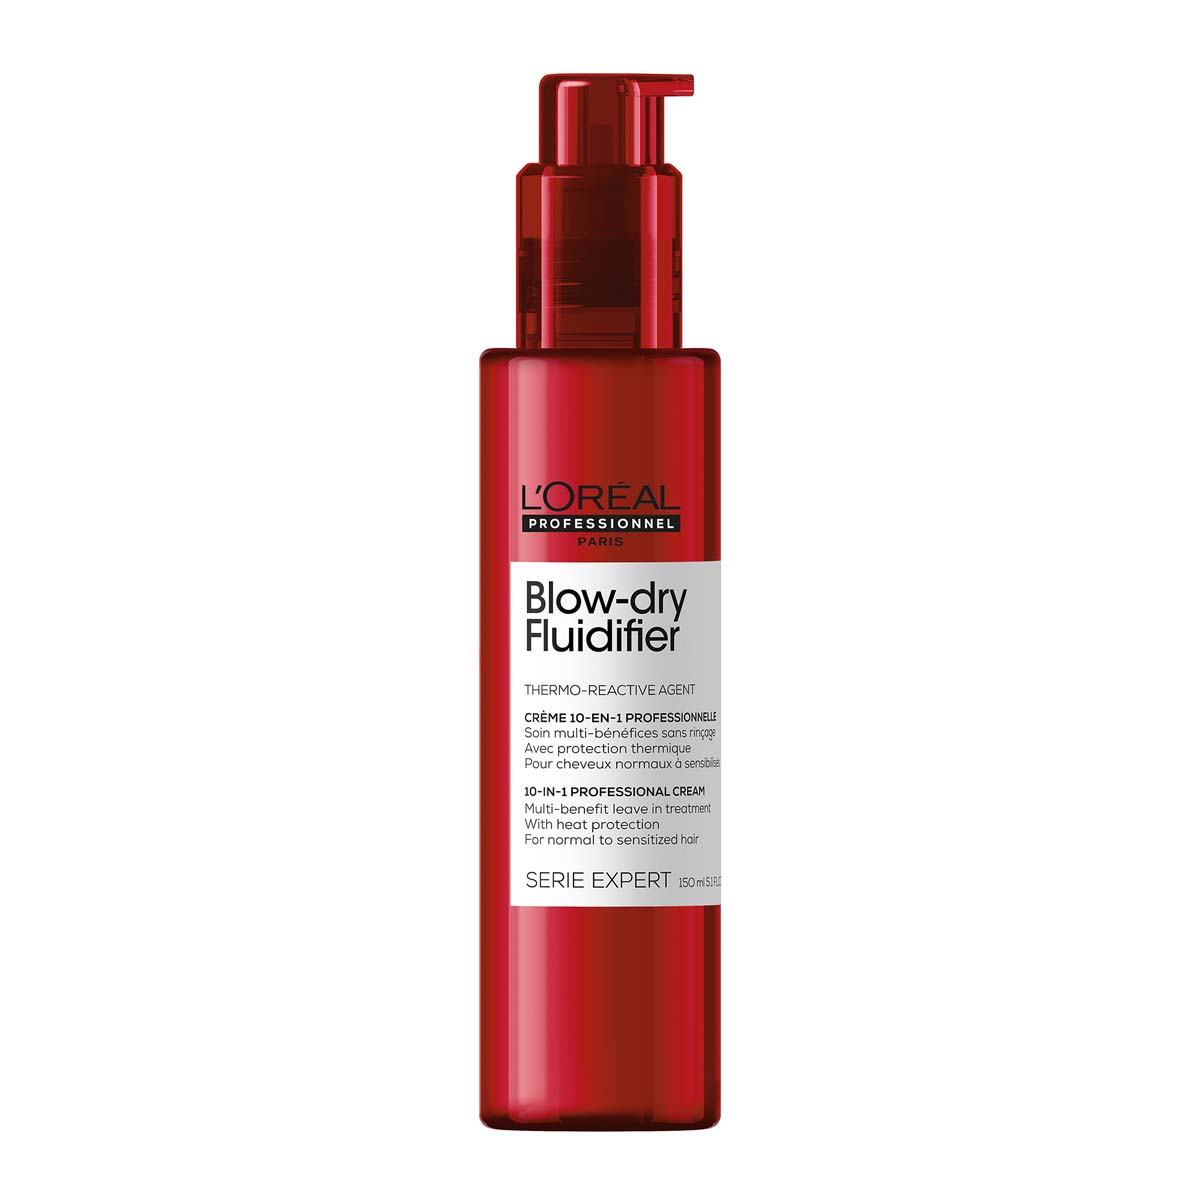 L'Oreal Professionnel Serie Expert Blow-Dry Fluidifier Multi-Benefit Blowdry Cream With Heat Protect